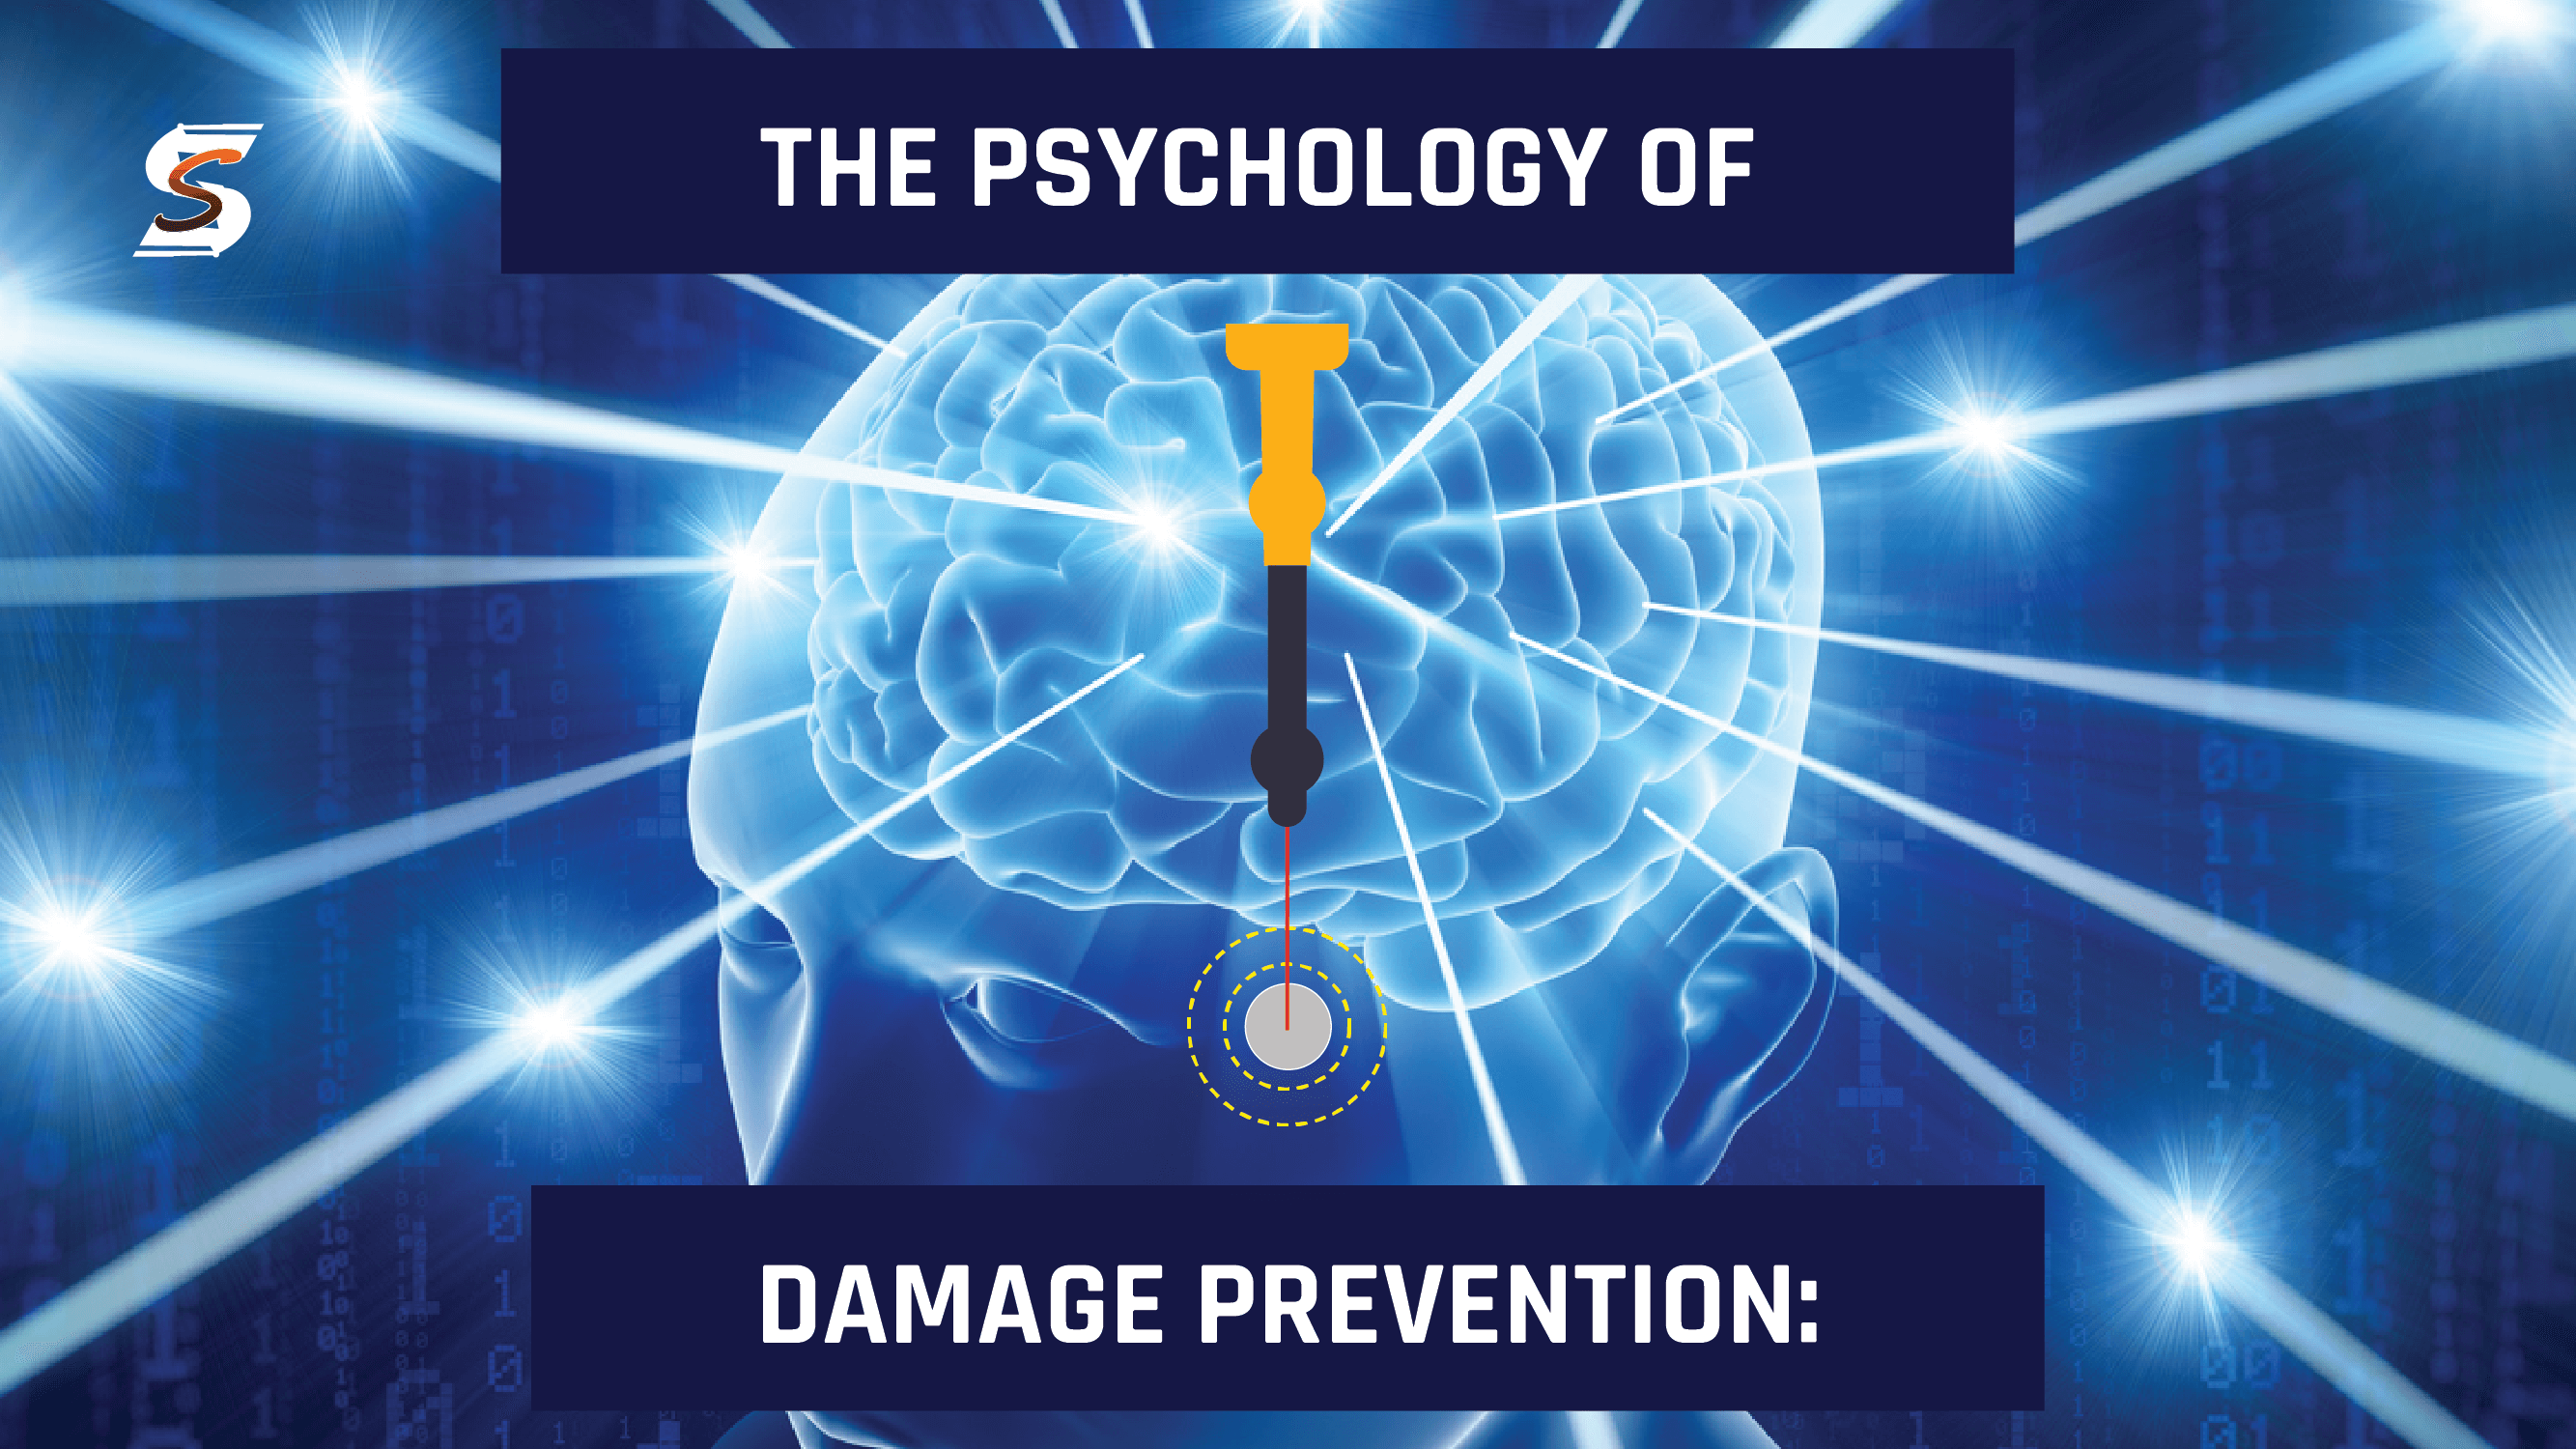 Featured image for “THE PSYCHOLOGY OF DAMAGE PREVENTION”